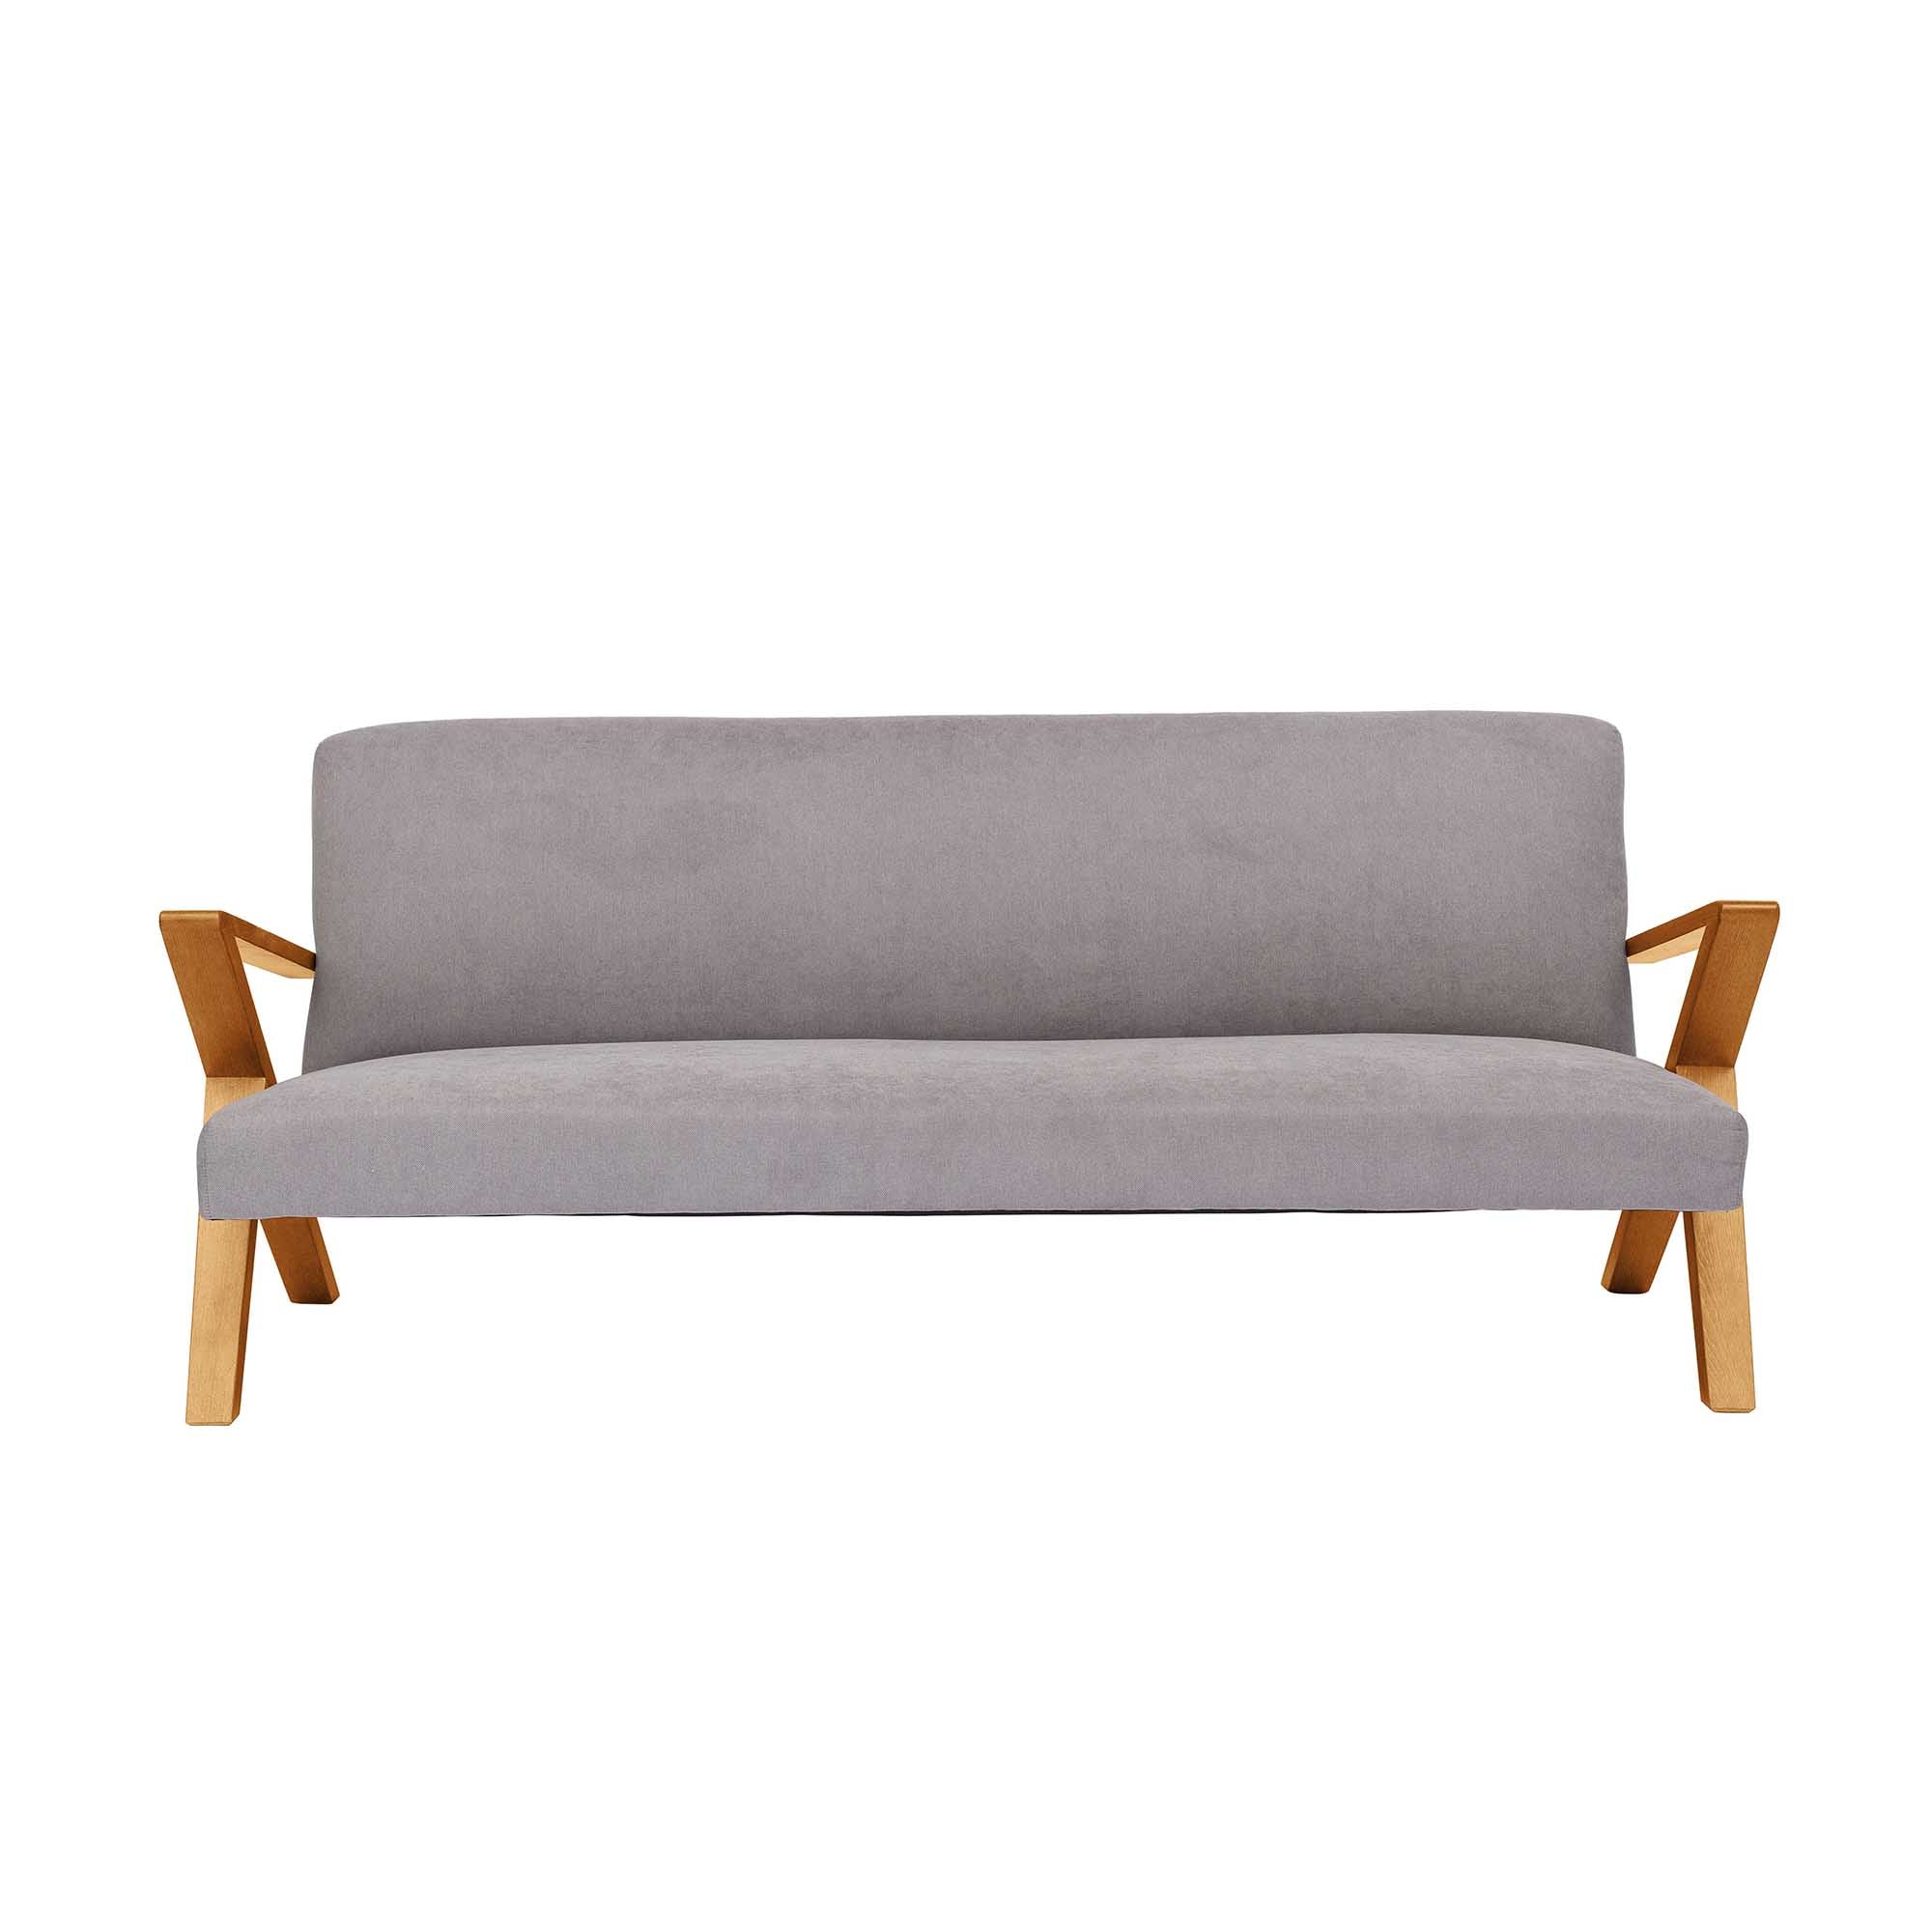 4-seater Sofa Beech Wood Frame, Oak Colour grey fabric, front view